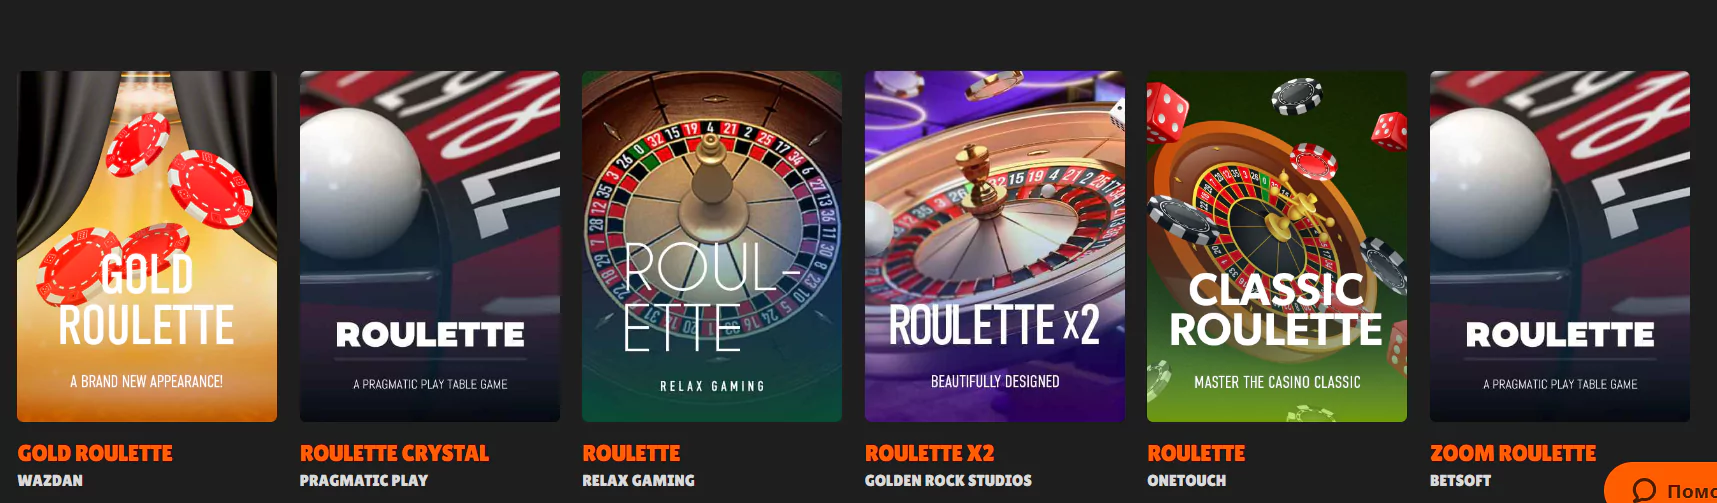 Screenshot of Real Money Roulette Online Games from Nitro Casino Official Website